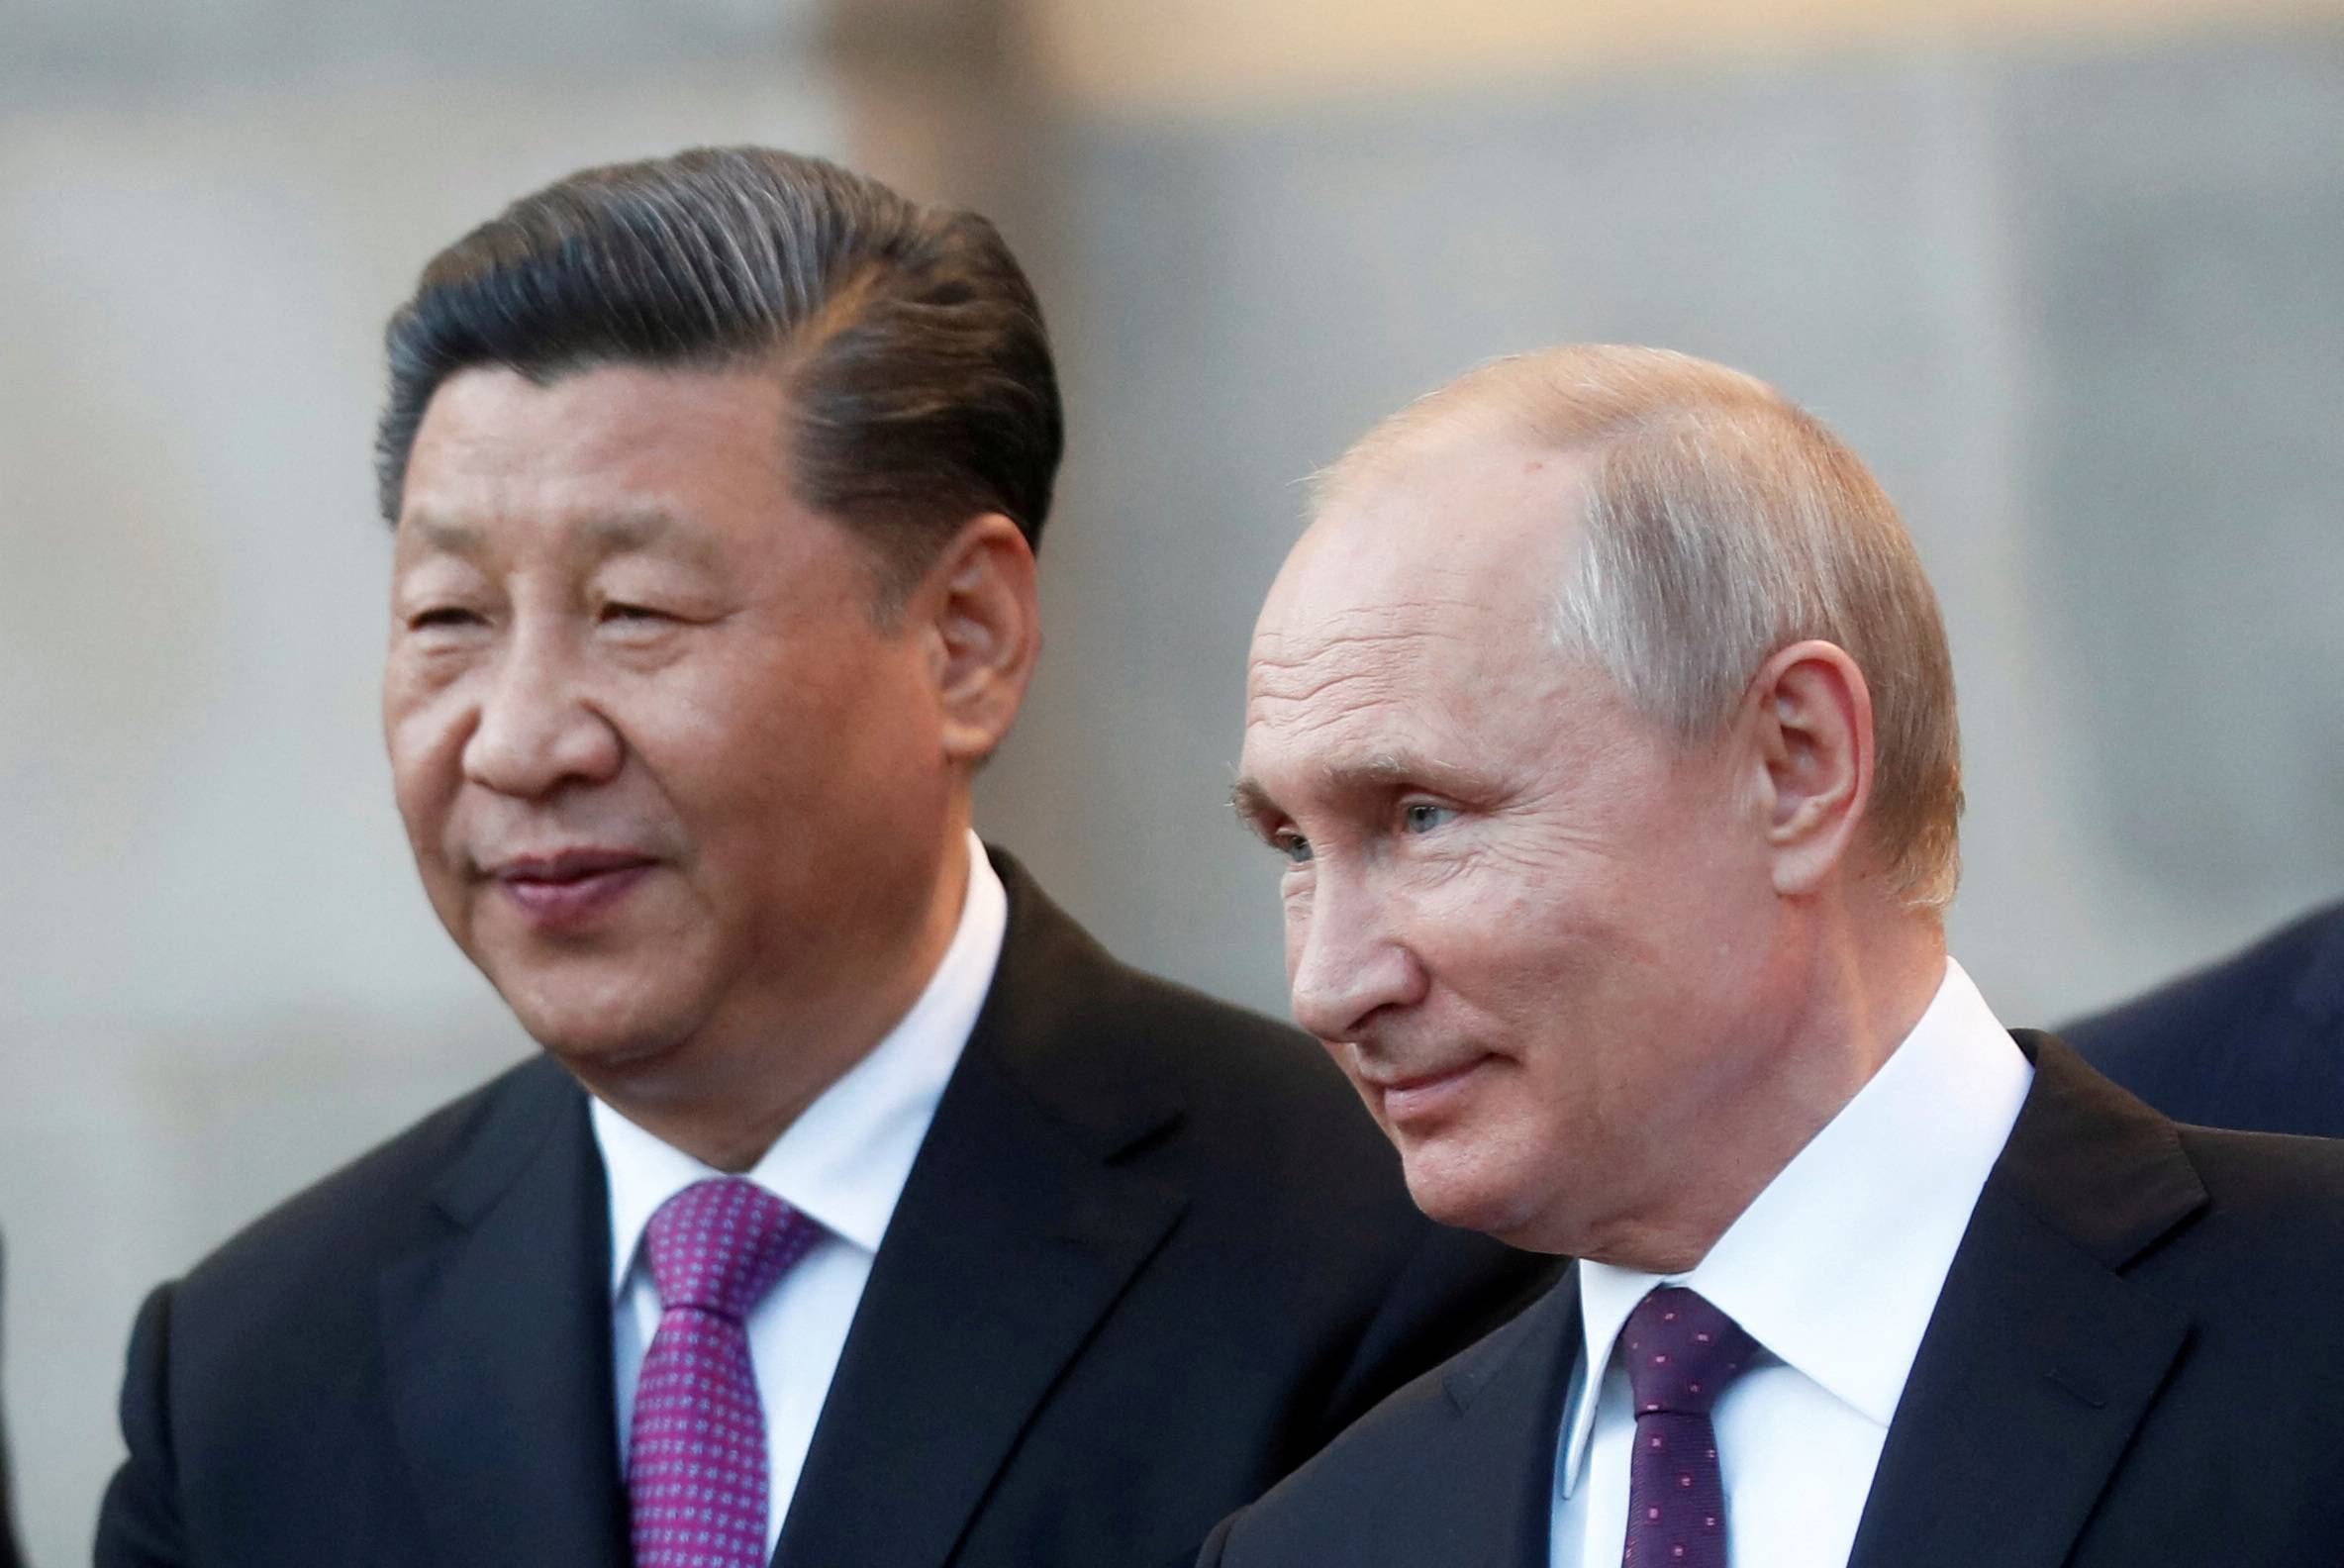 Chinese leader Xi Jinping and Russian President Vladimir Putin. China has repeatedly denied sending military equipment to Russia since Moscow's invasion of Ukraine in February 2022.  | POOL / VIA REUTERS